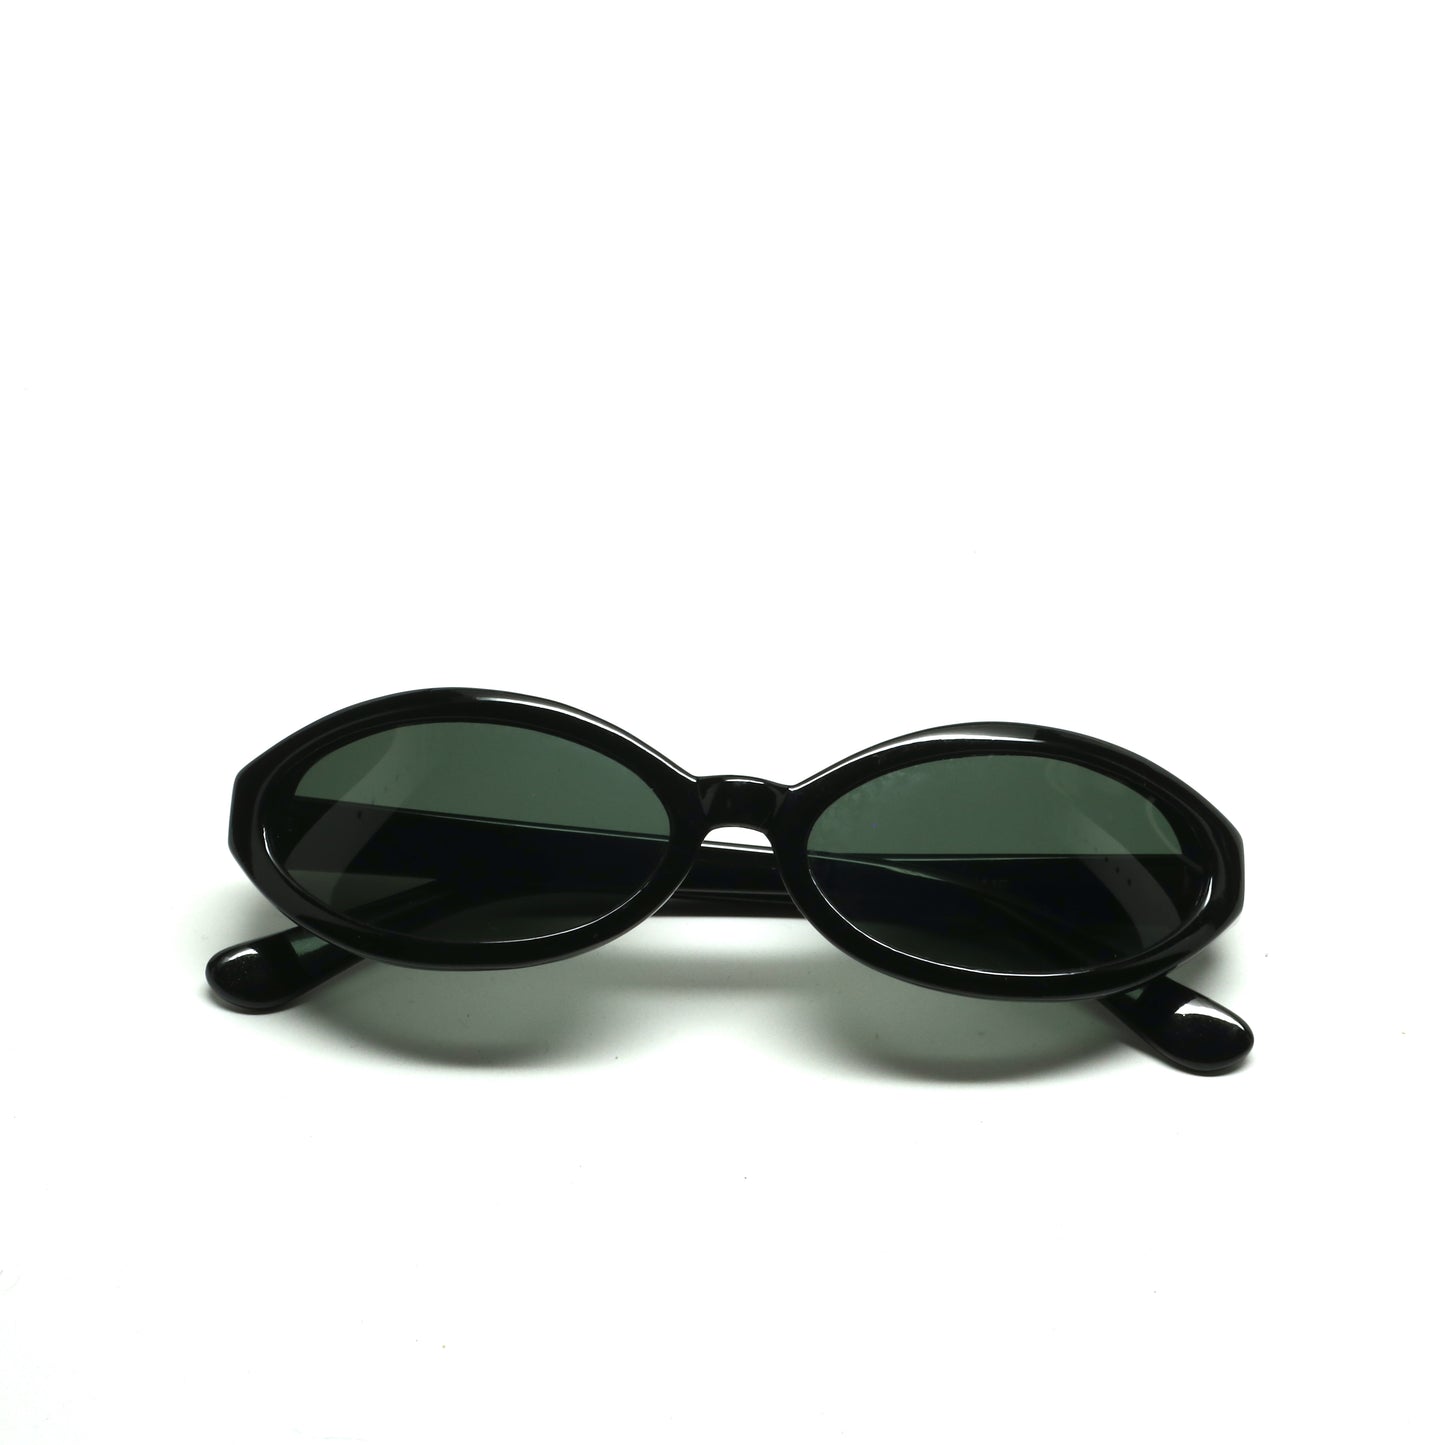 //Style 41// Deluxe Vintage 90s Deadstock High Quality Oval Sunglasses - Black